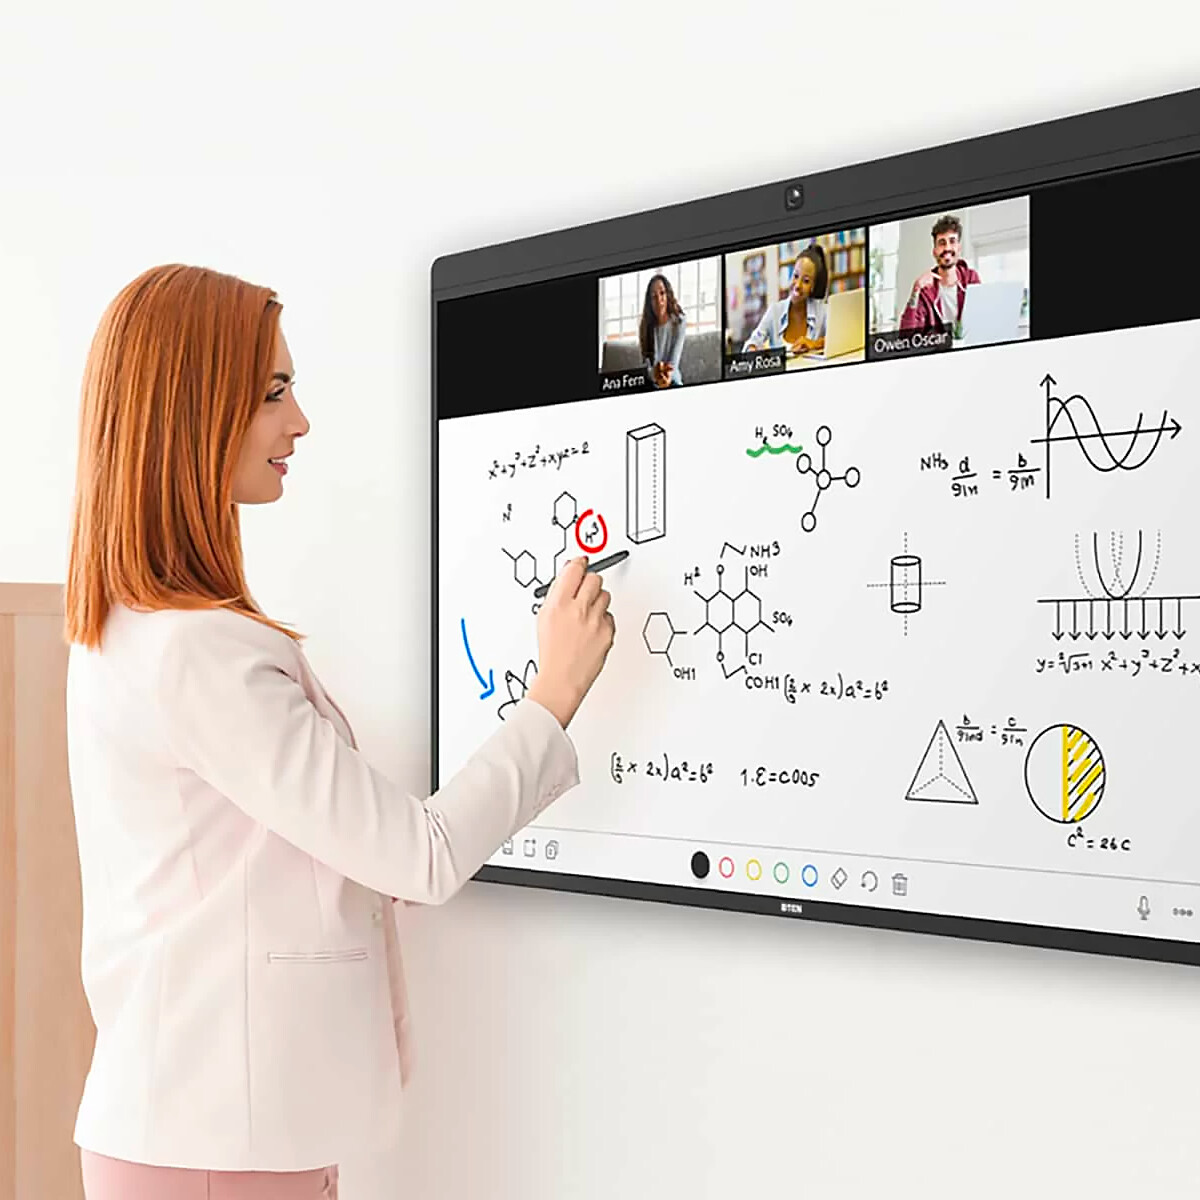 DTEN-ON-55-All-in-One-Multi-Touch-Display